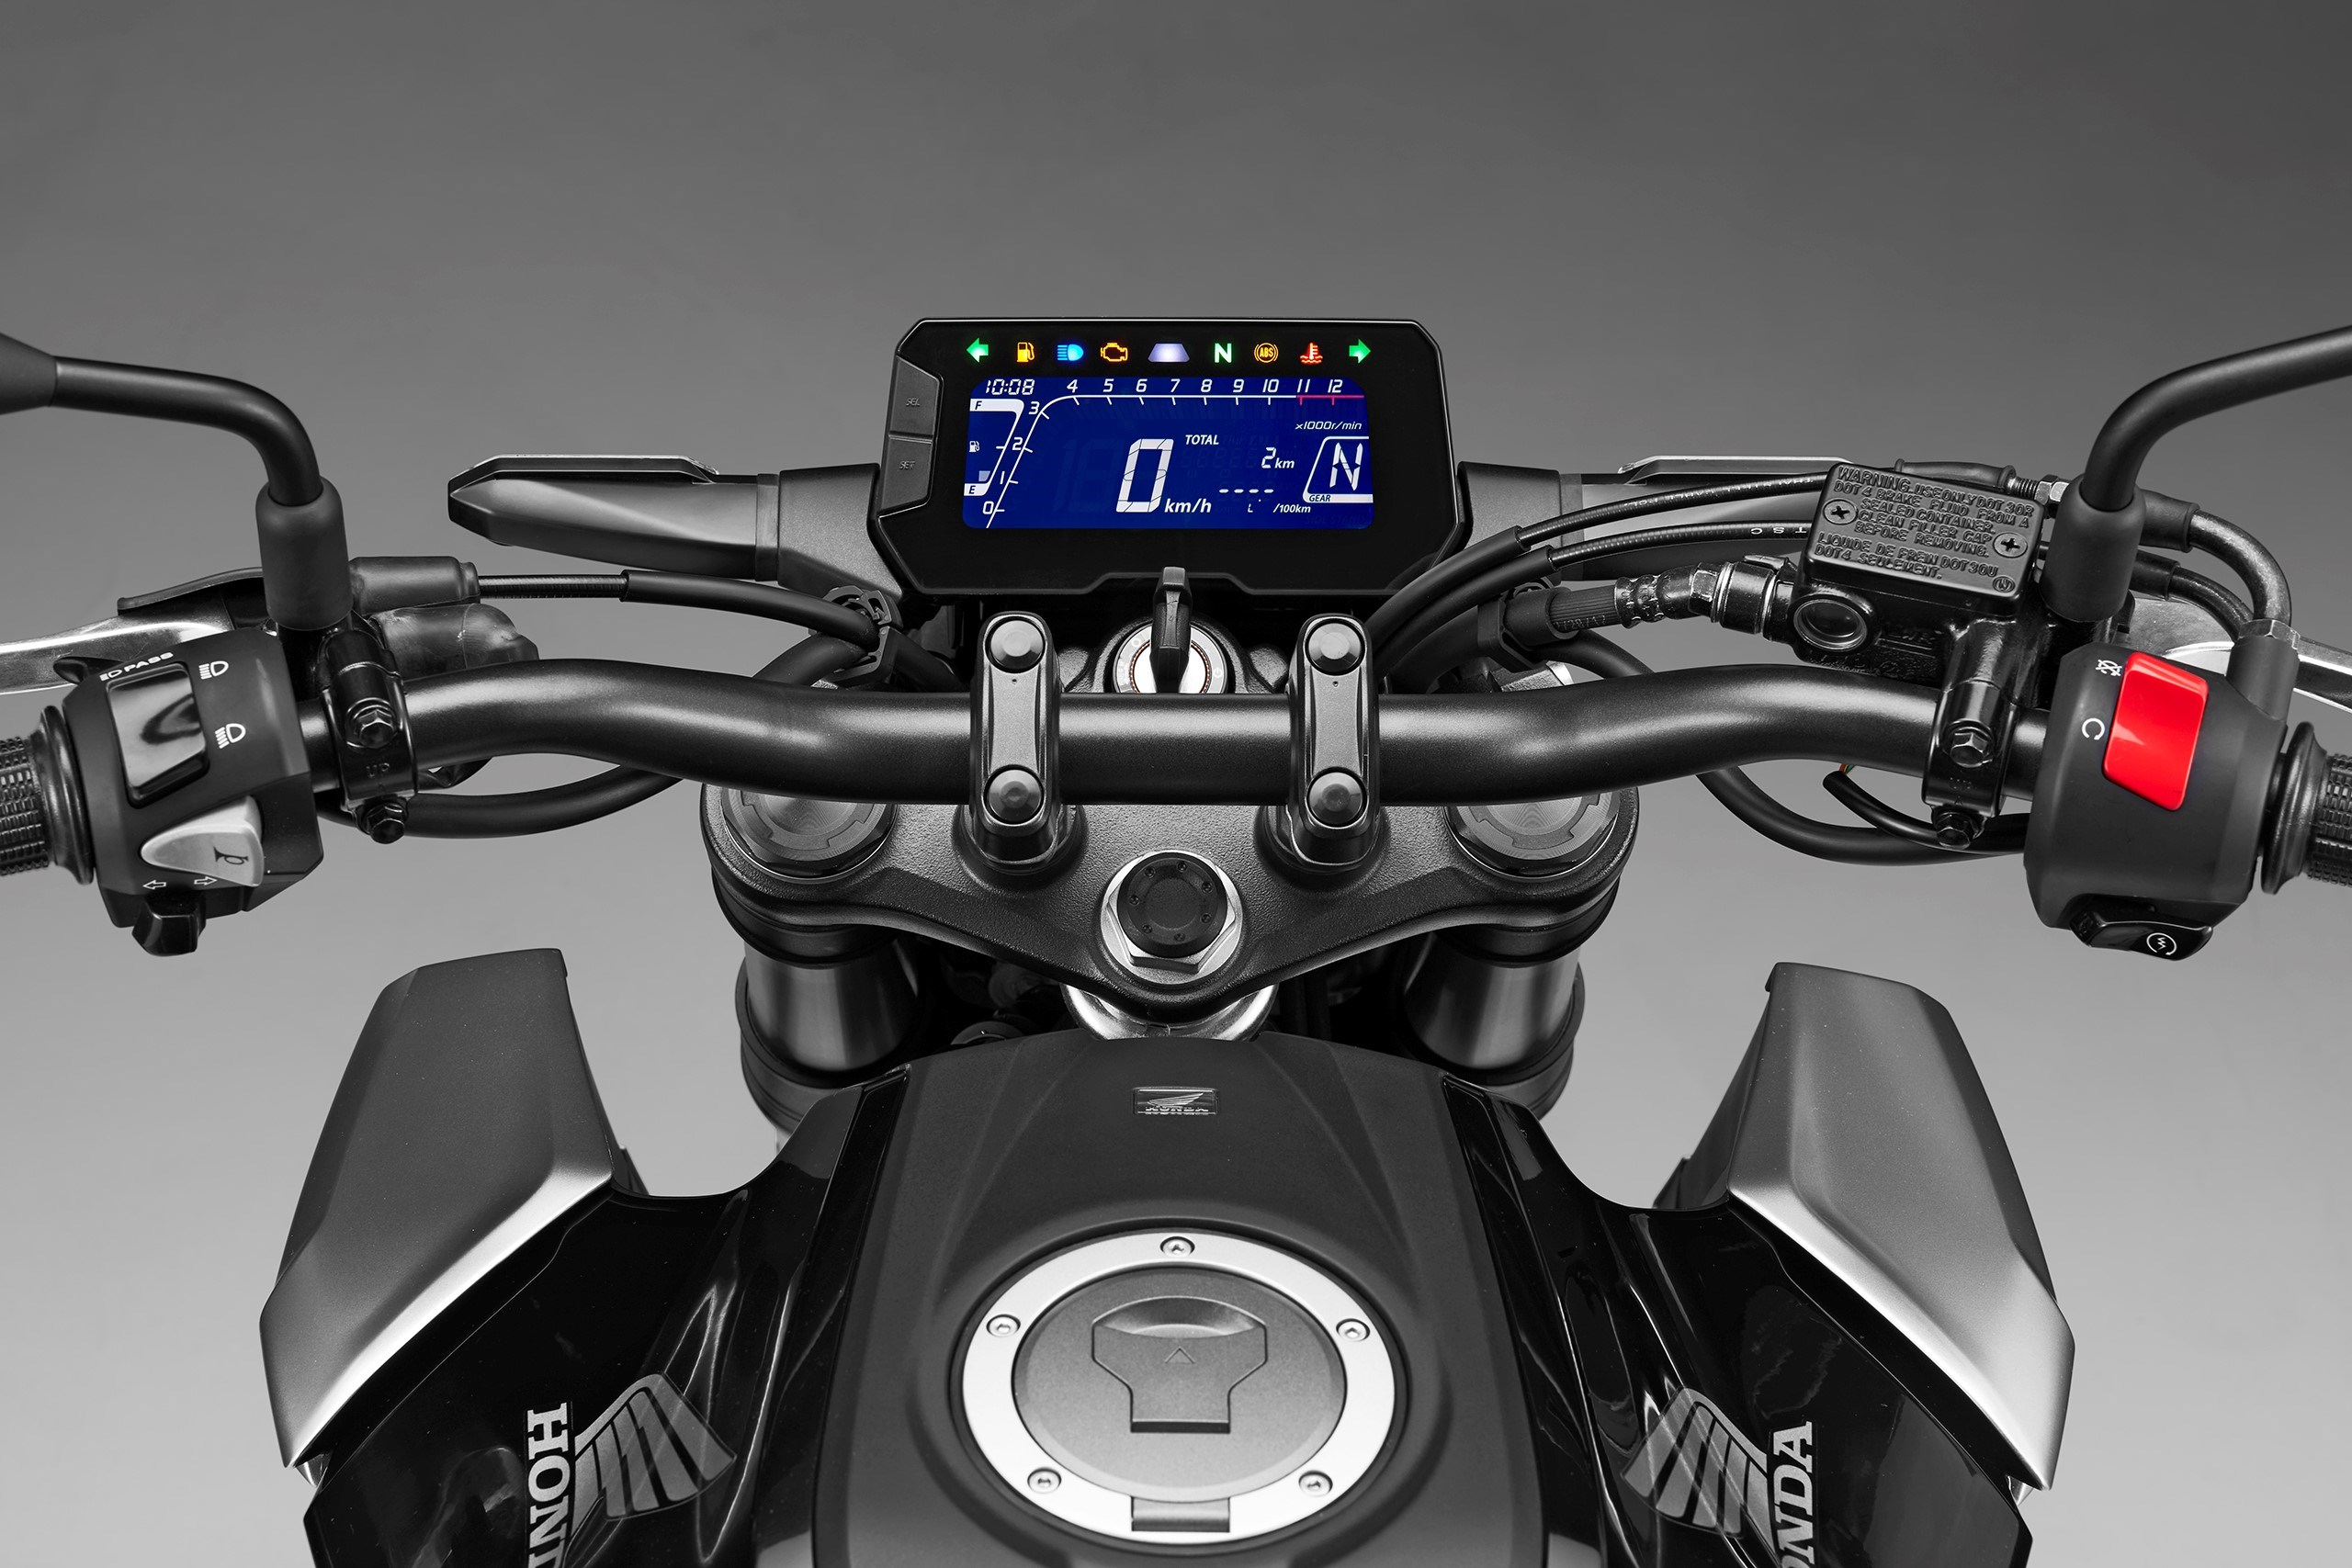 A large LCD screen relays key information to the rider